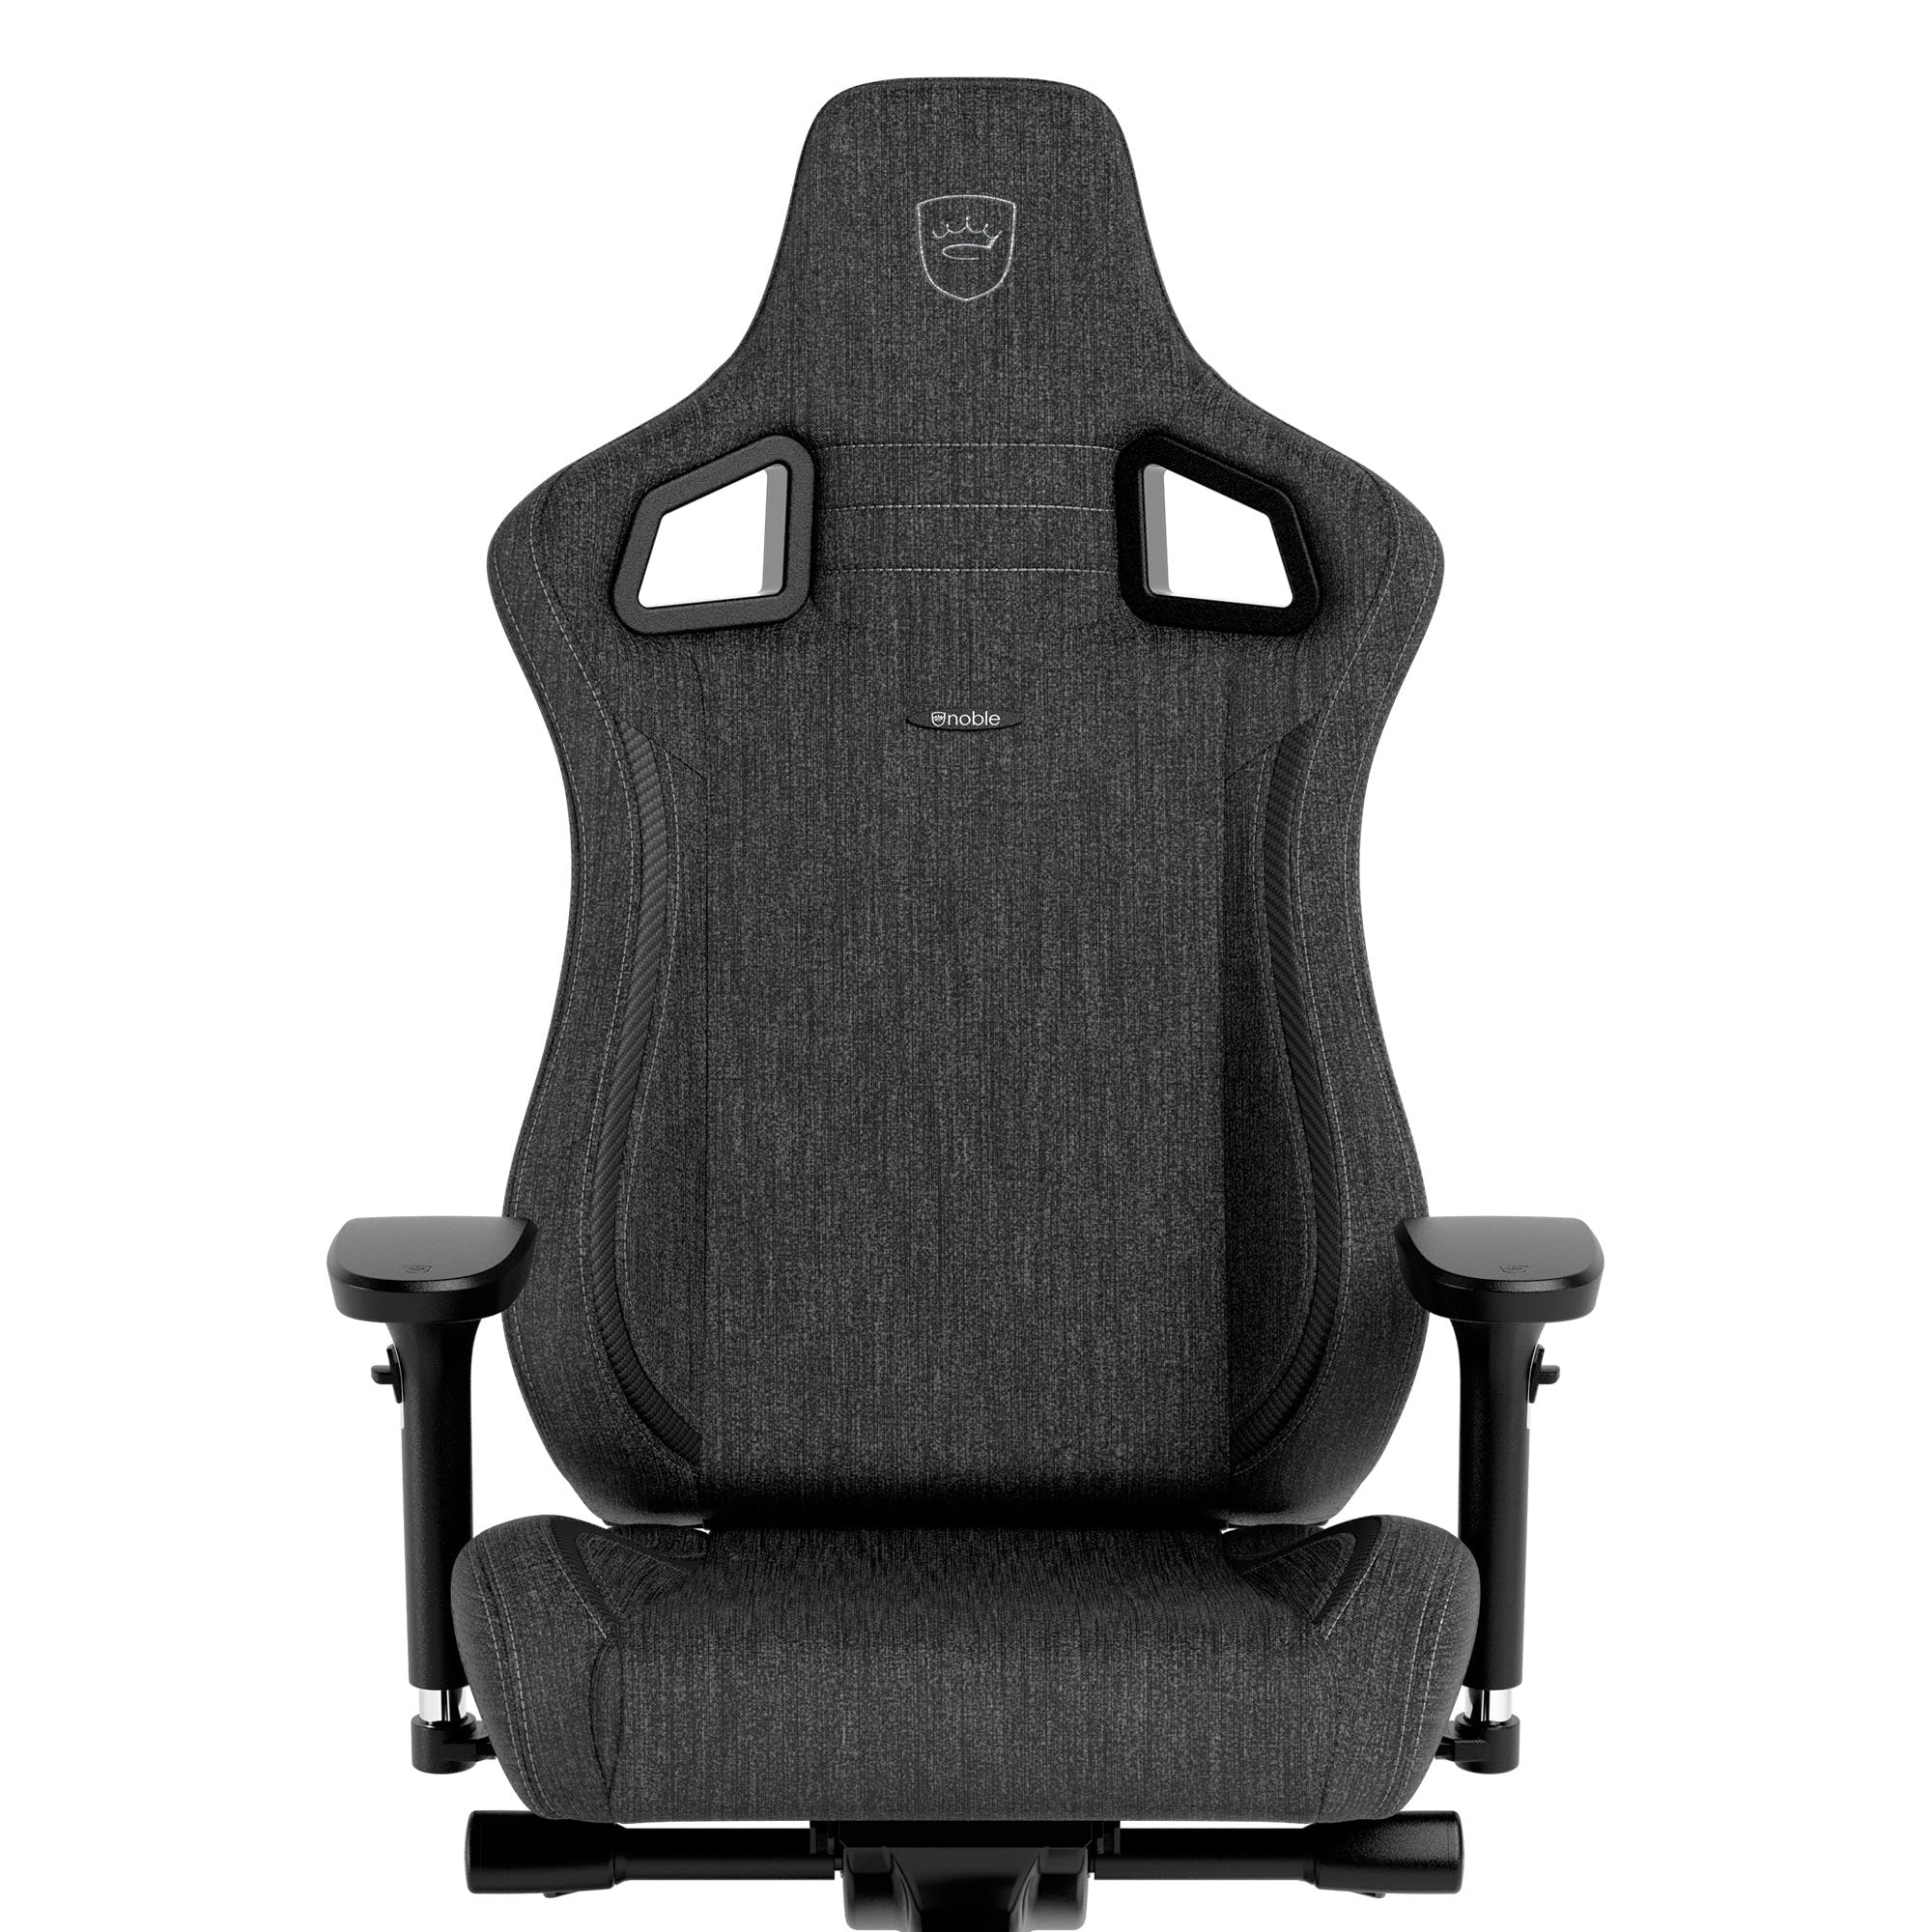 noblechairs - noblechairs EPIC Compact TX Gaming Chair - Anthracite